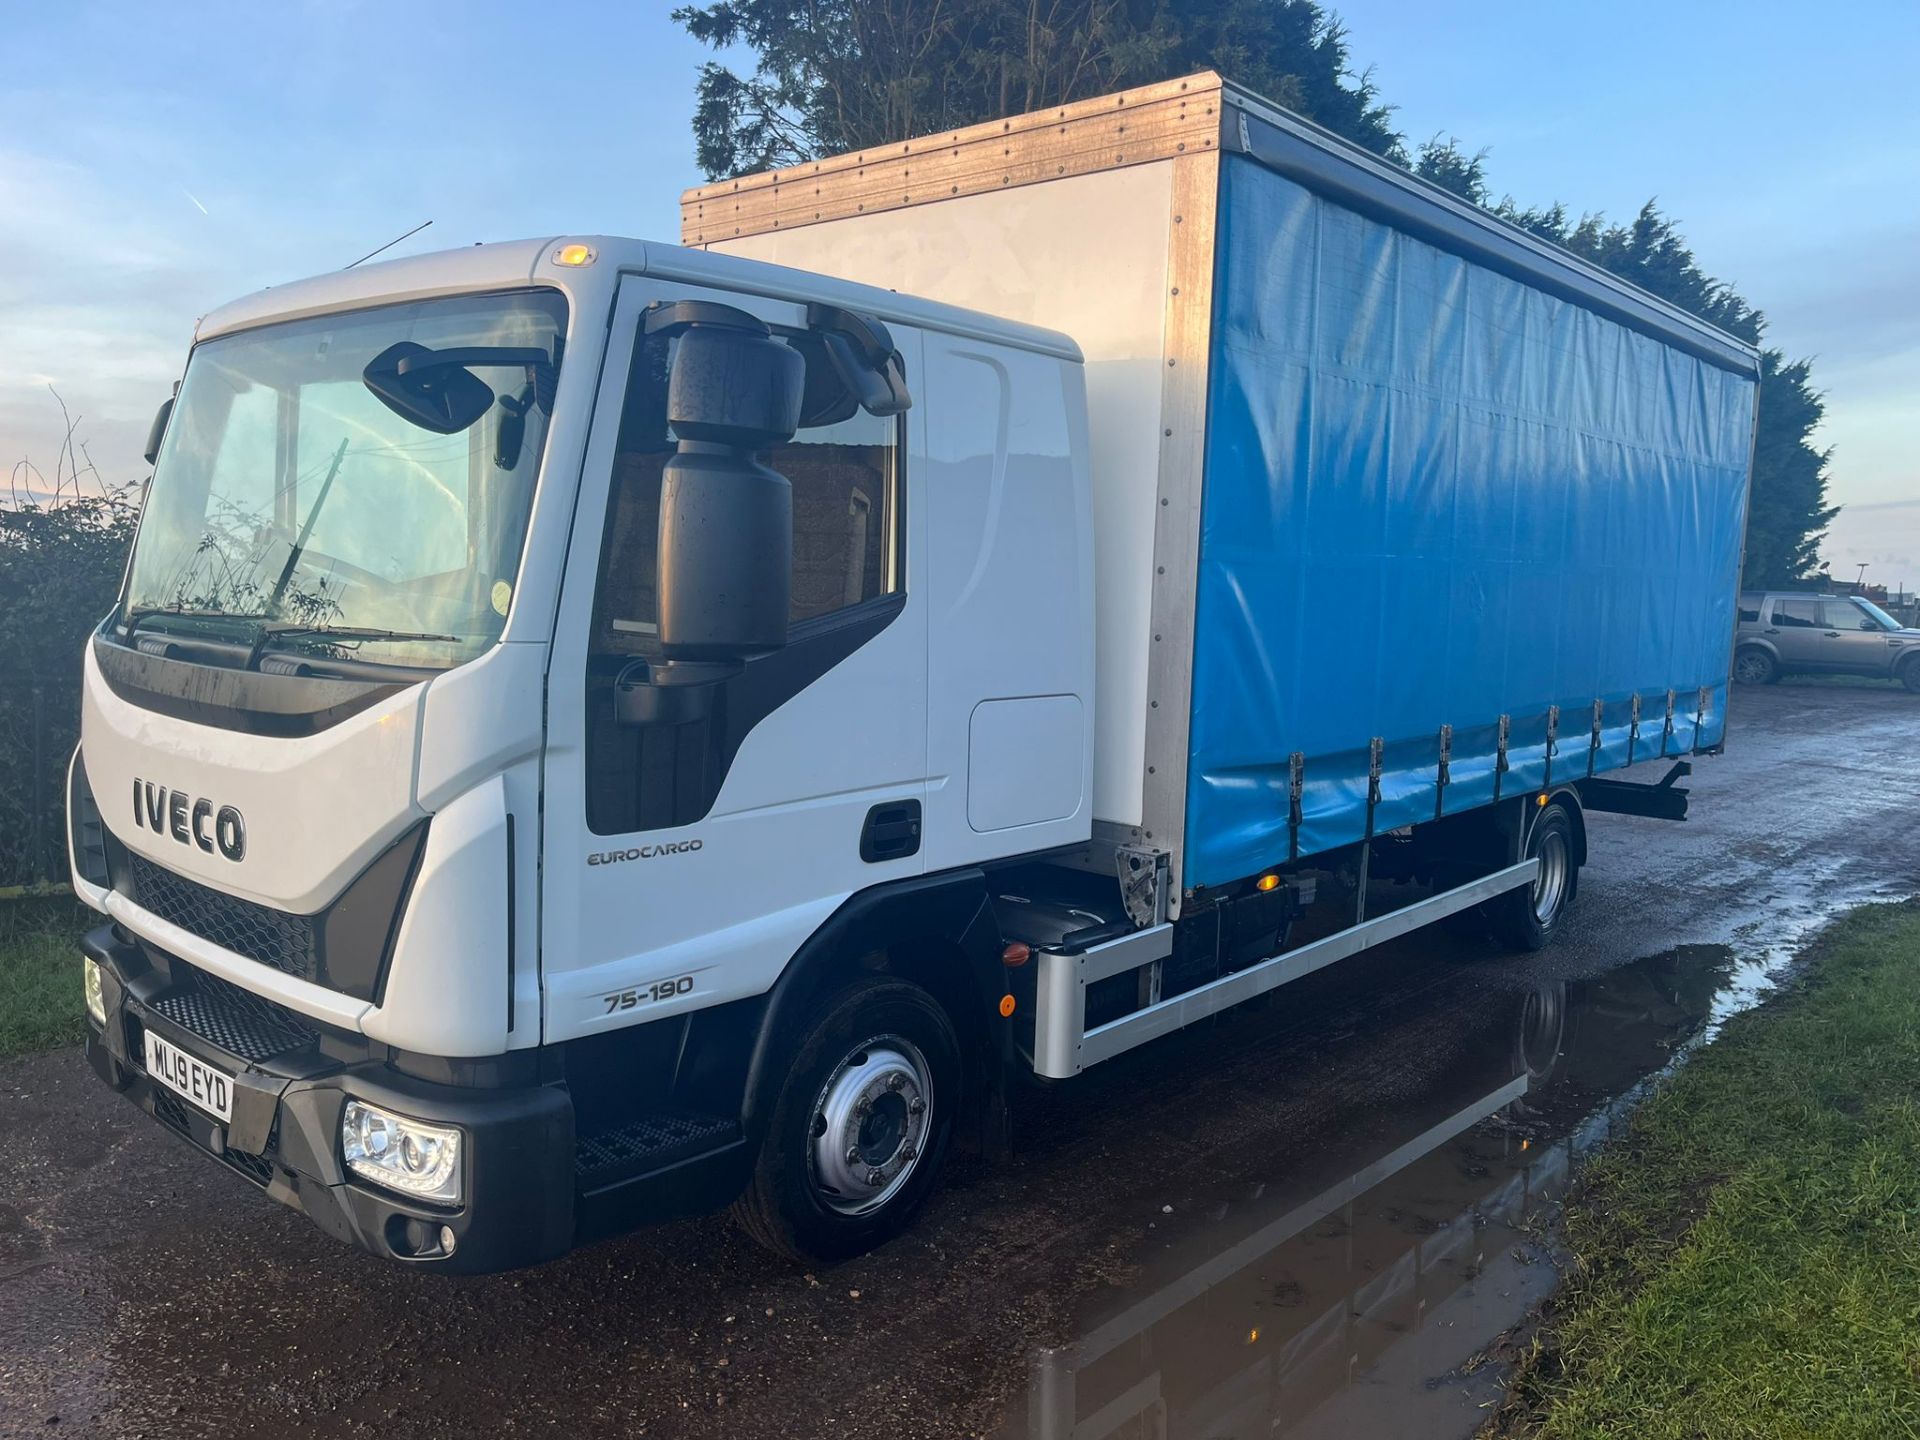 SPACIOUS SLEEPER CAB: 2019 IVECO EUROCARGO FOR HAULING - Image 16 of 21